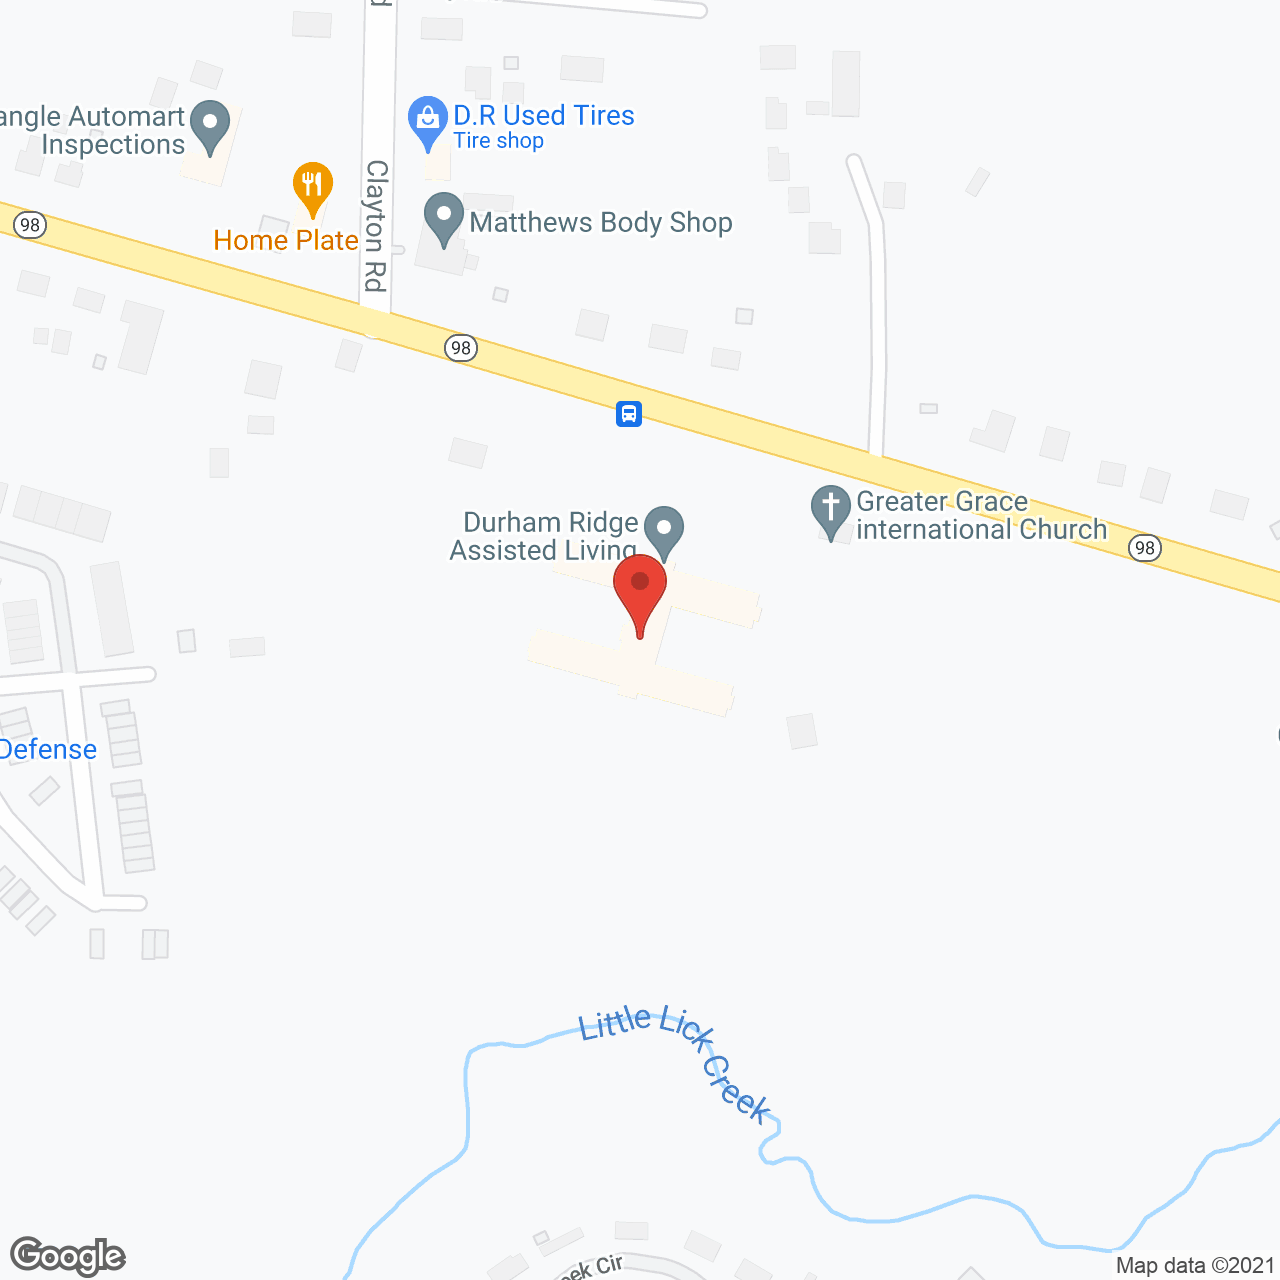 Durham Ridge Assisted Living in google map